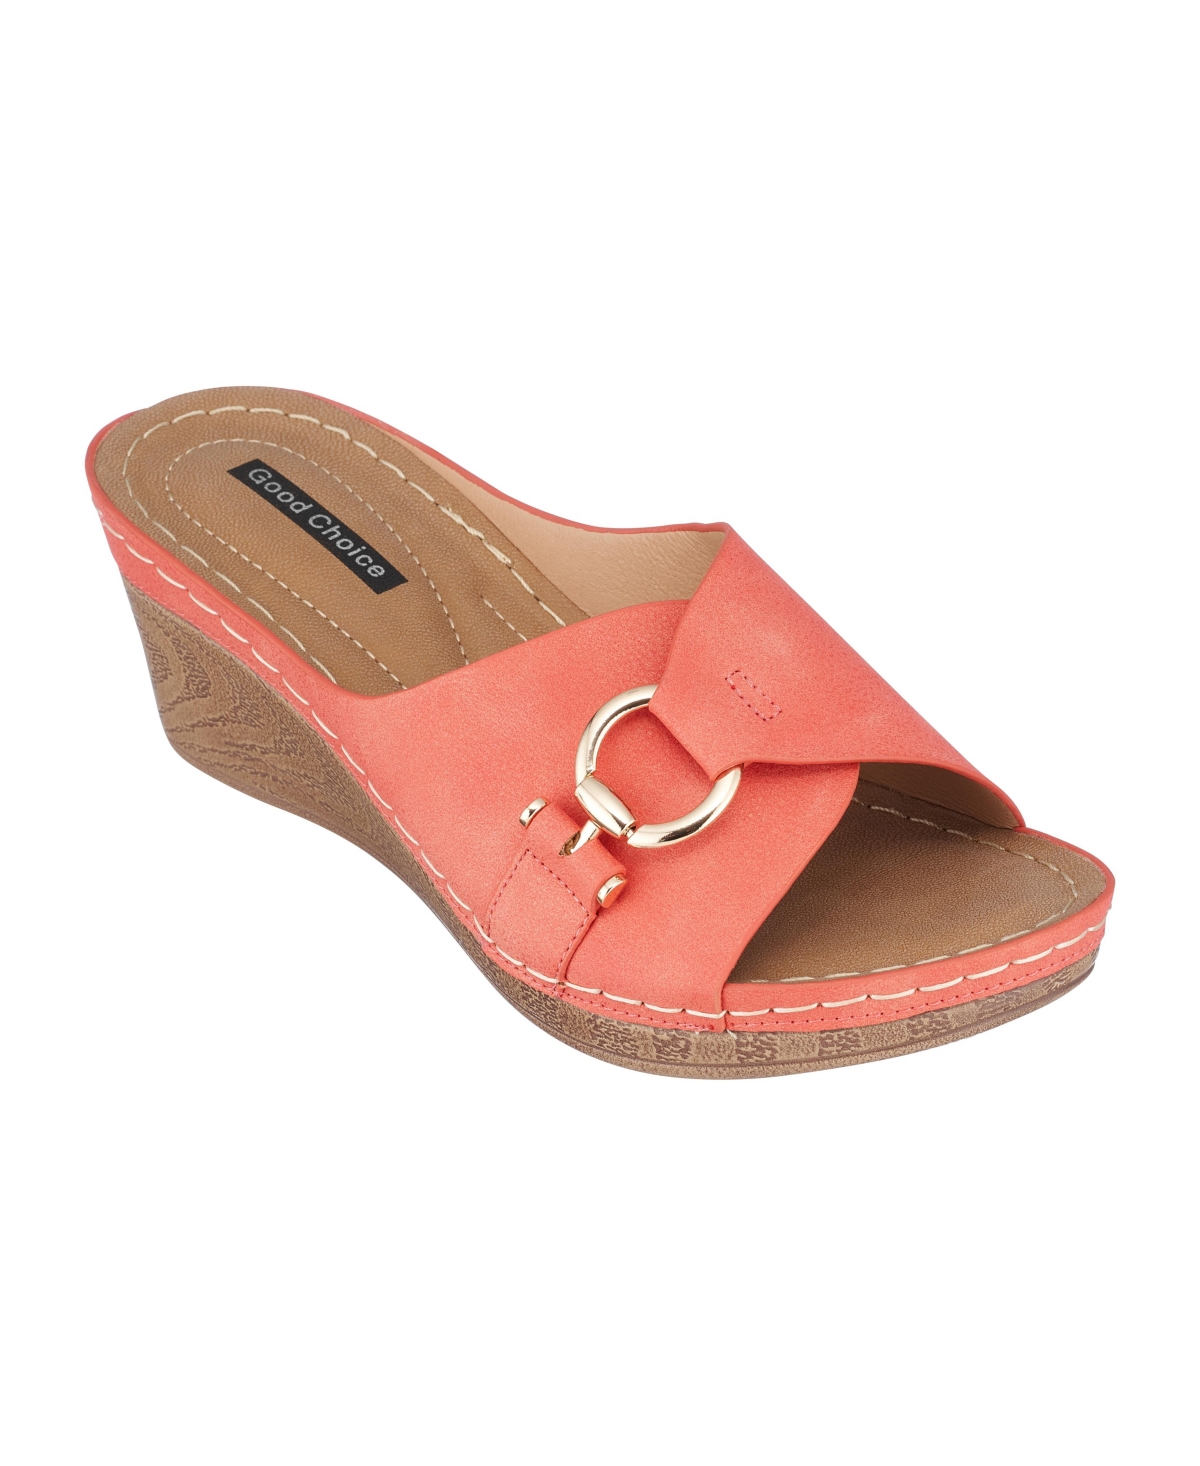 Women's Bay Wedge Sandals - Coral